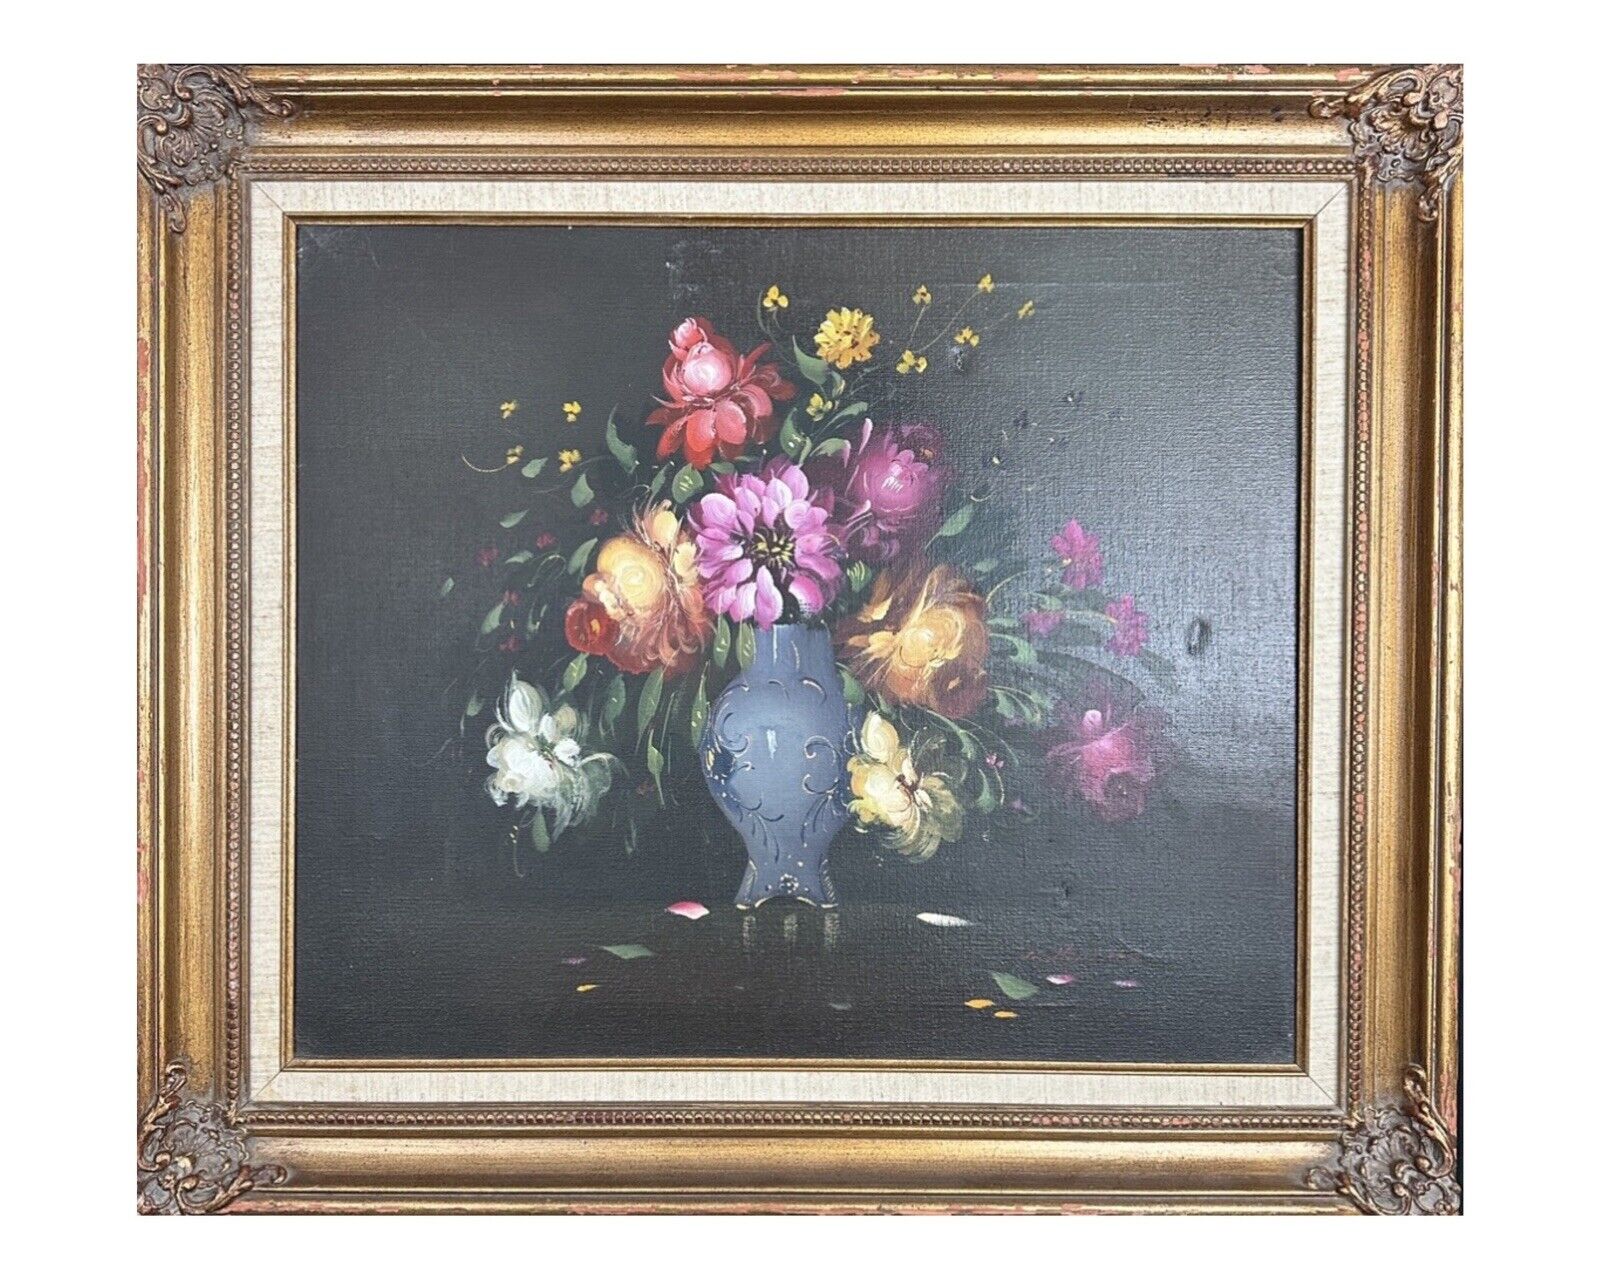 R. HUNTHER Vintage Dutch Style Floral Still Life Oil on Canvas Painting